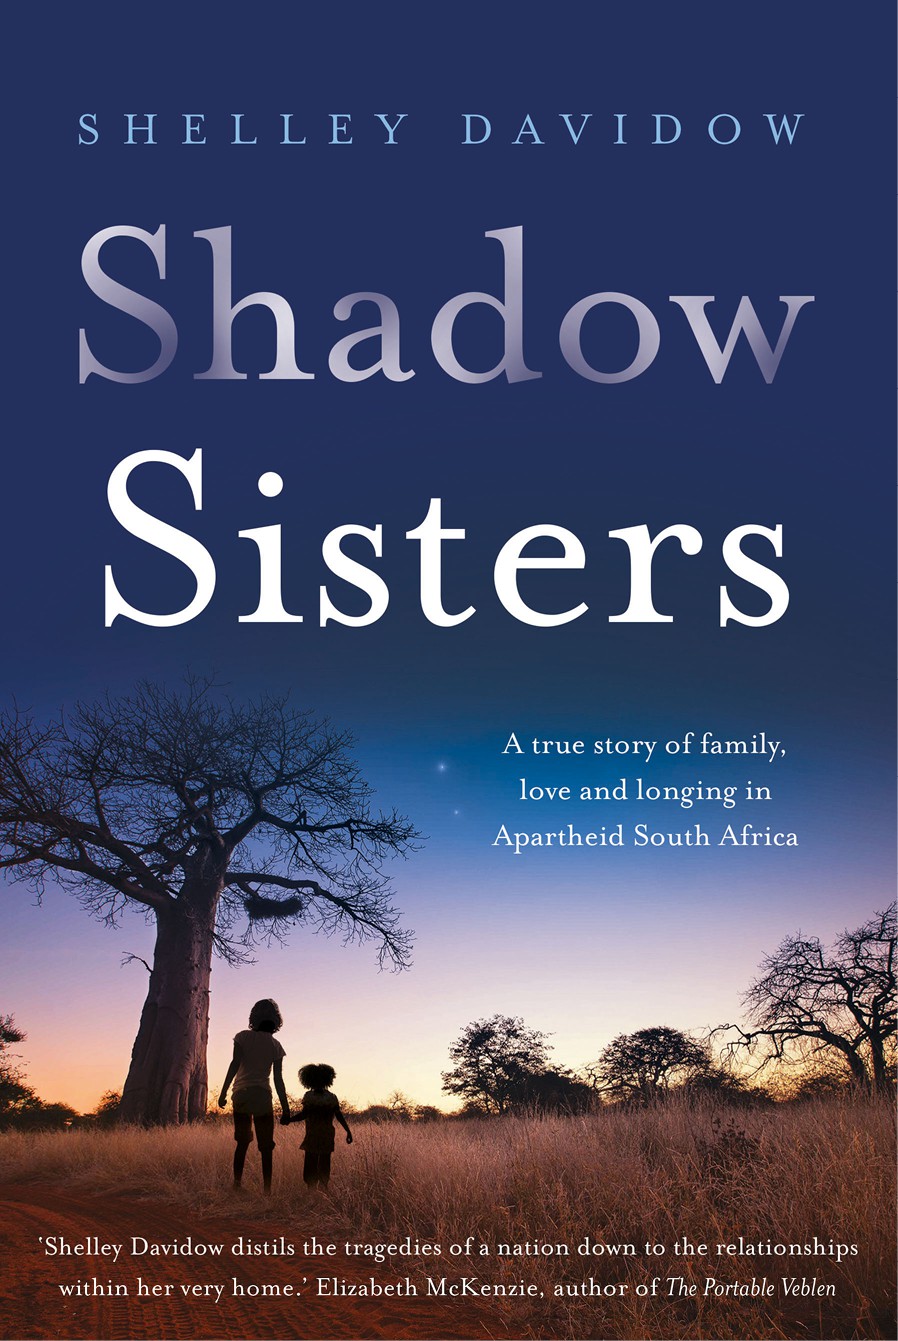 Shadow sister. True sisters. The longing.